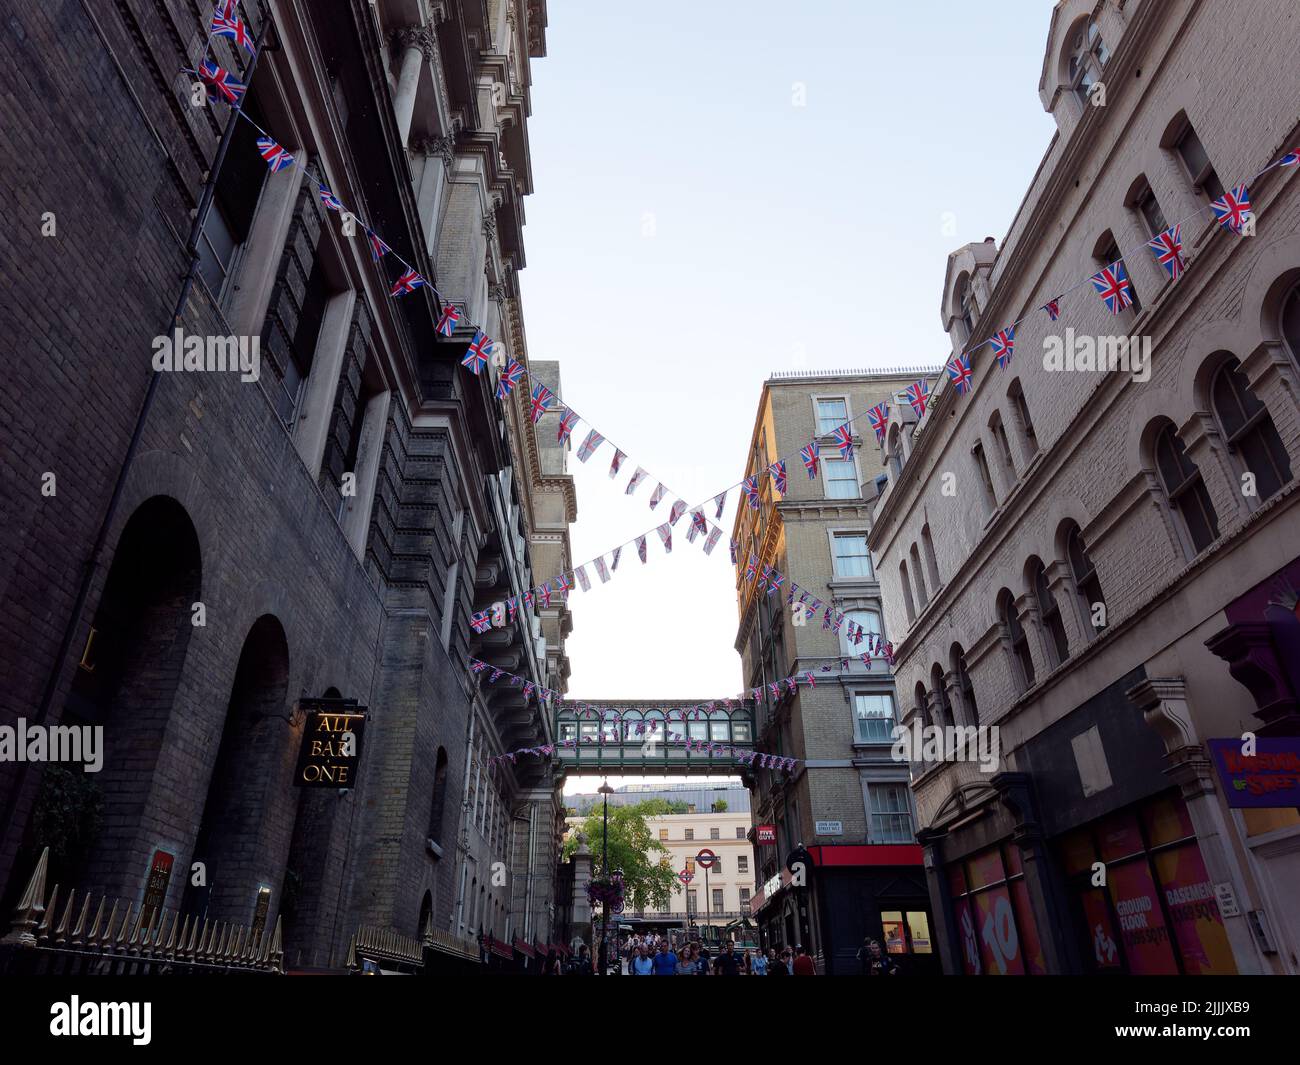 London, Greater London, England, June 22 2022: Villiers Street which links the embankment area to Charing Cross Station. Bunting in the foreground and Stock Photo